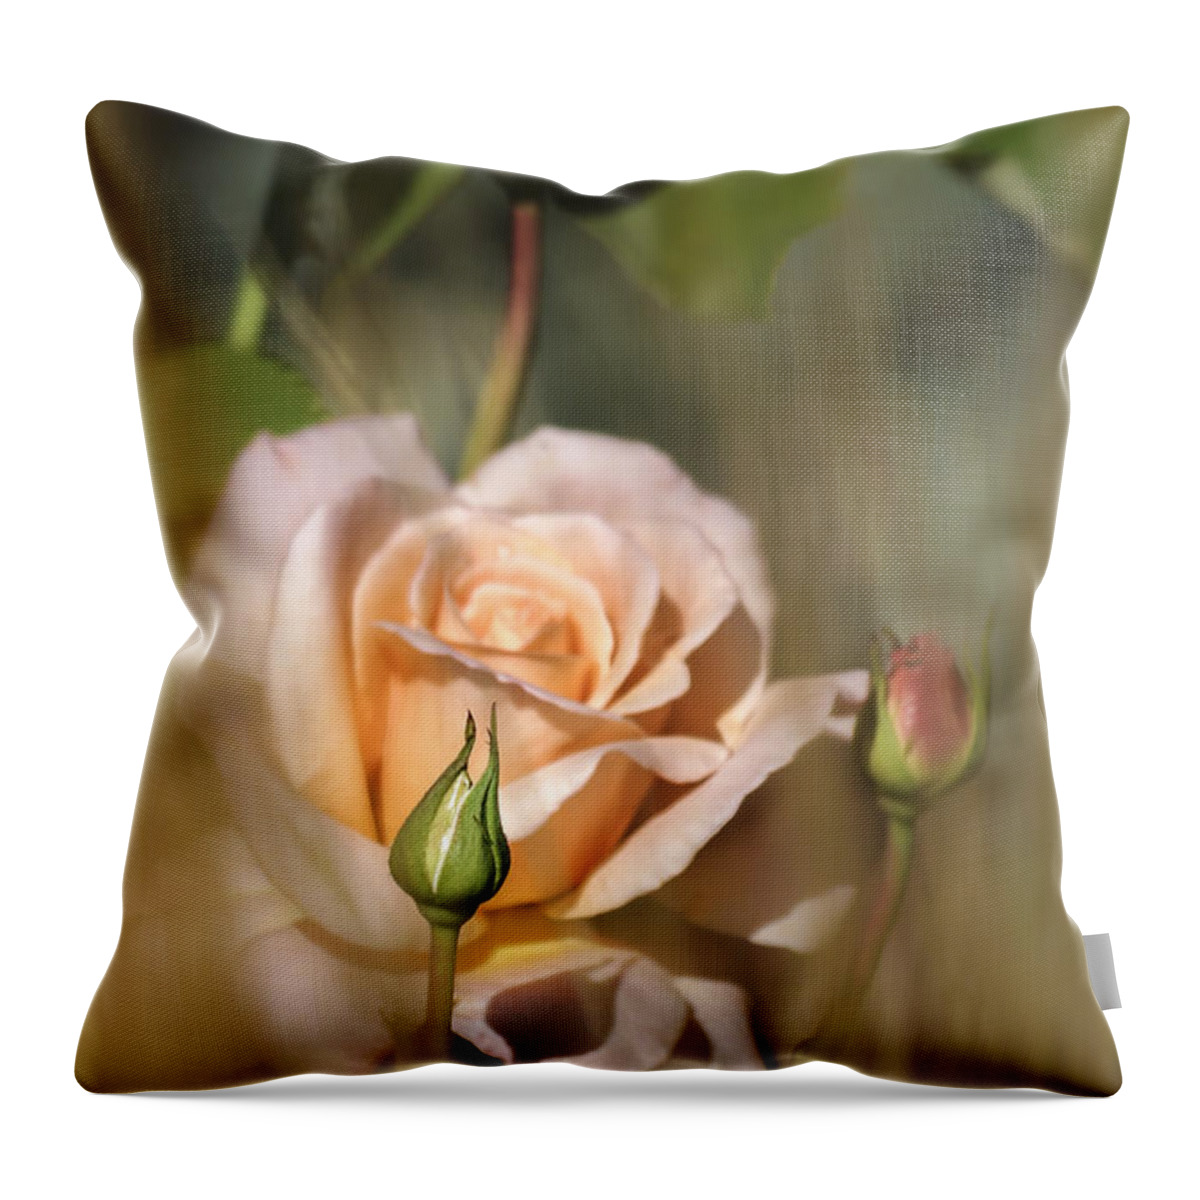 Flowers Throw Pillow featuring the photograph Late Summer Rose by Albert Seger